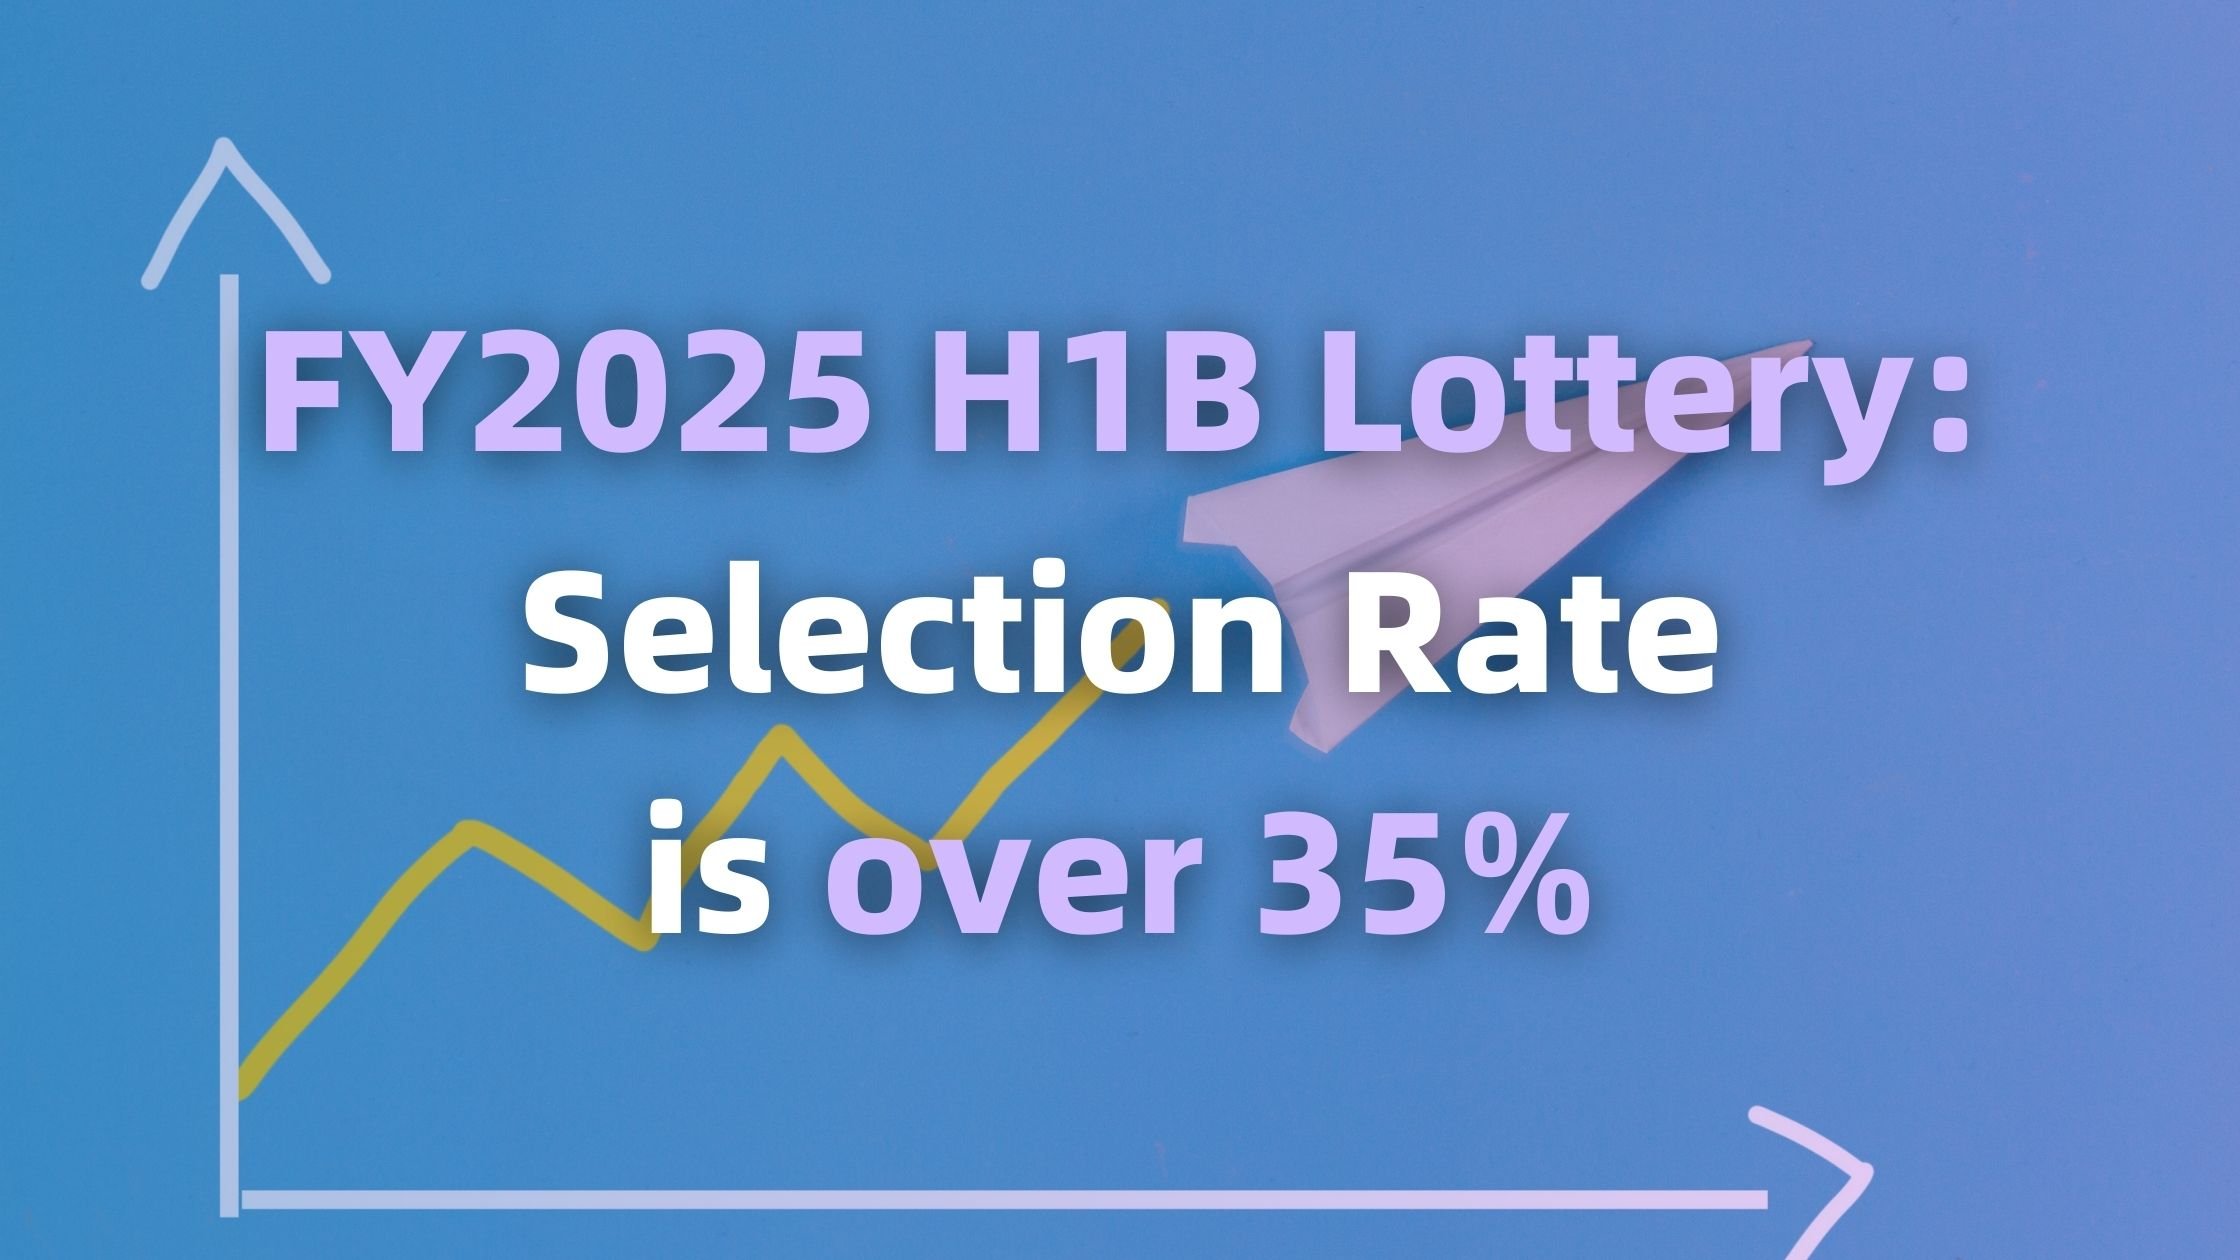 FY2025 H1B Lottery